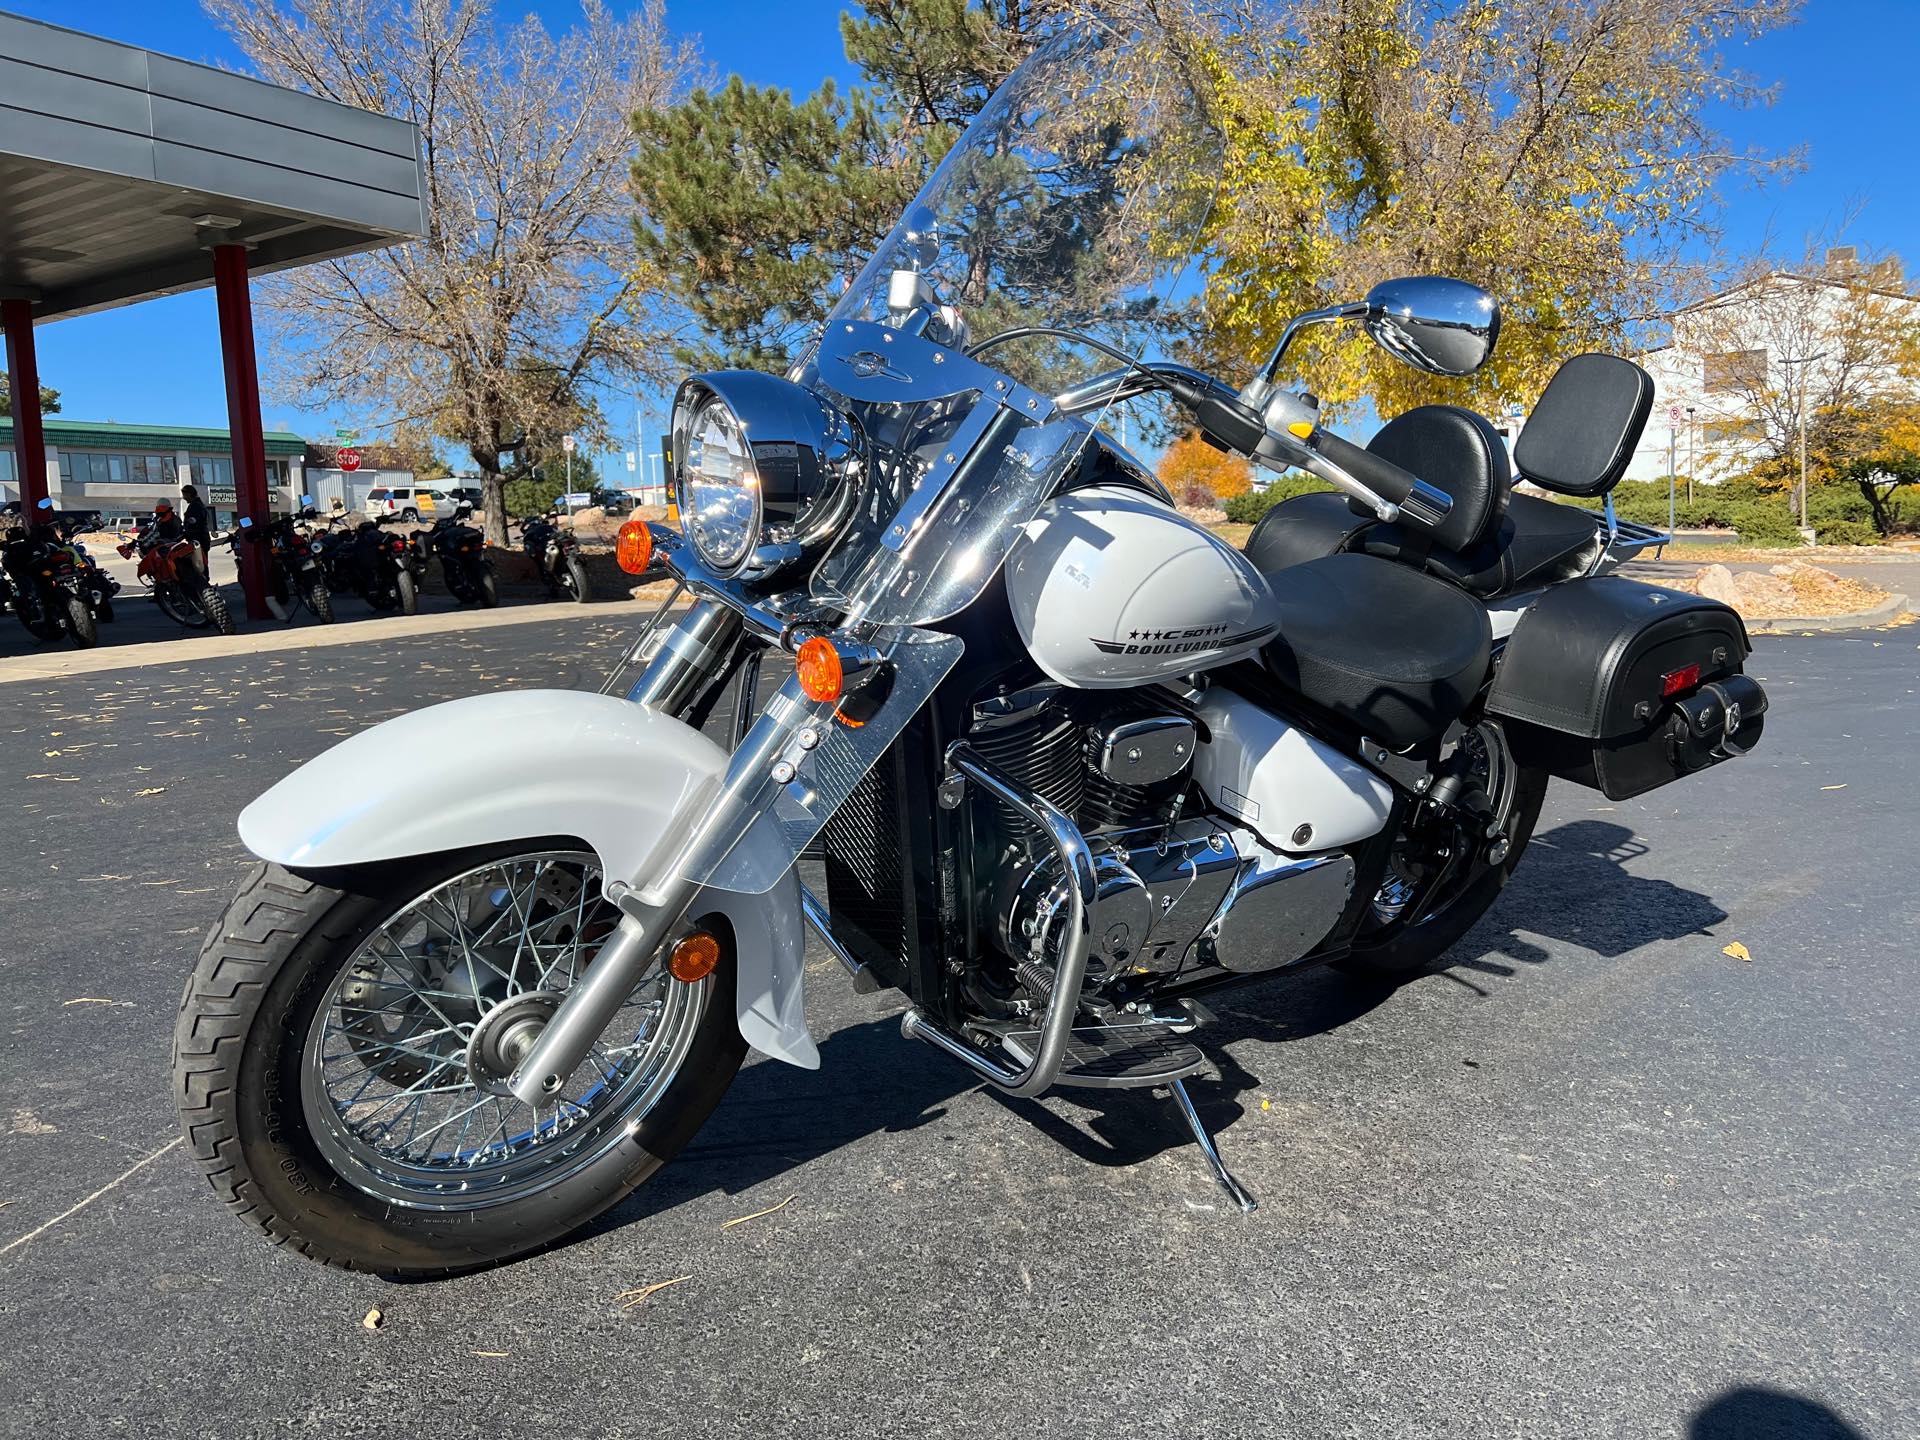 2017 Suzuki Boulevard C50 at Aces Motorcycles - Fort Collins